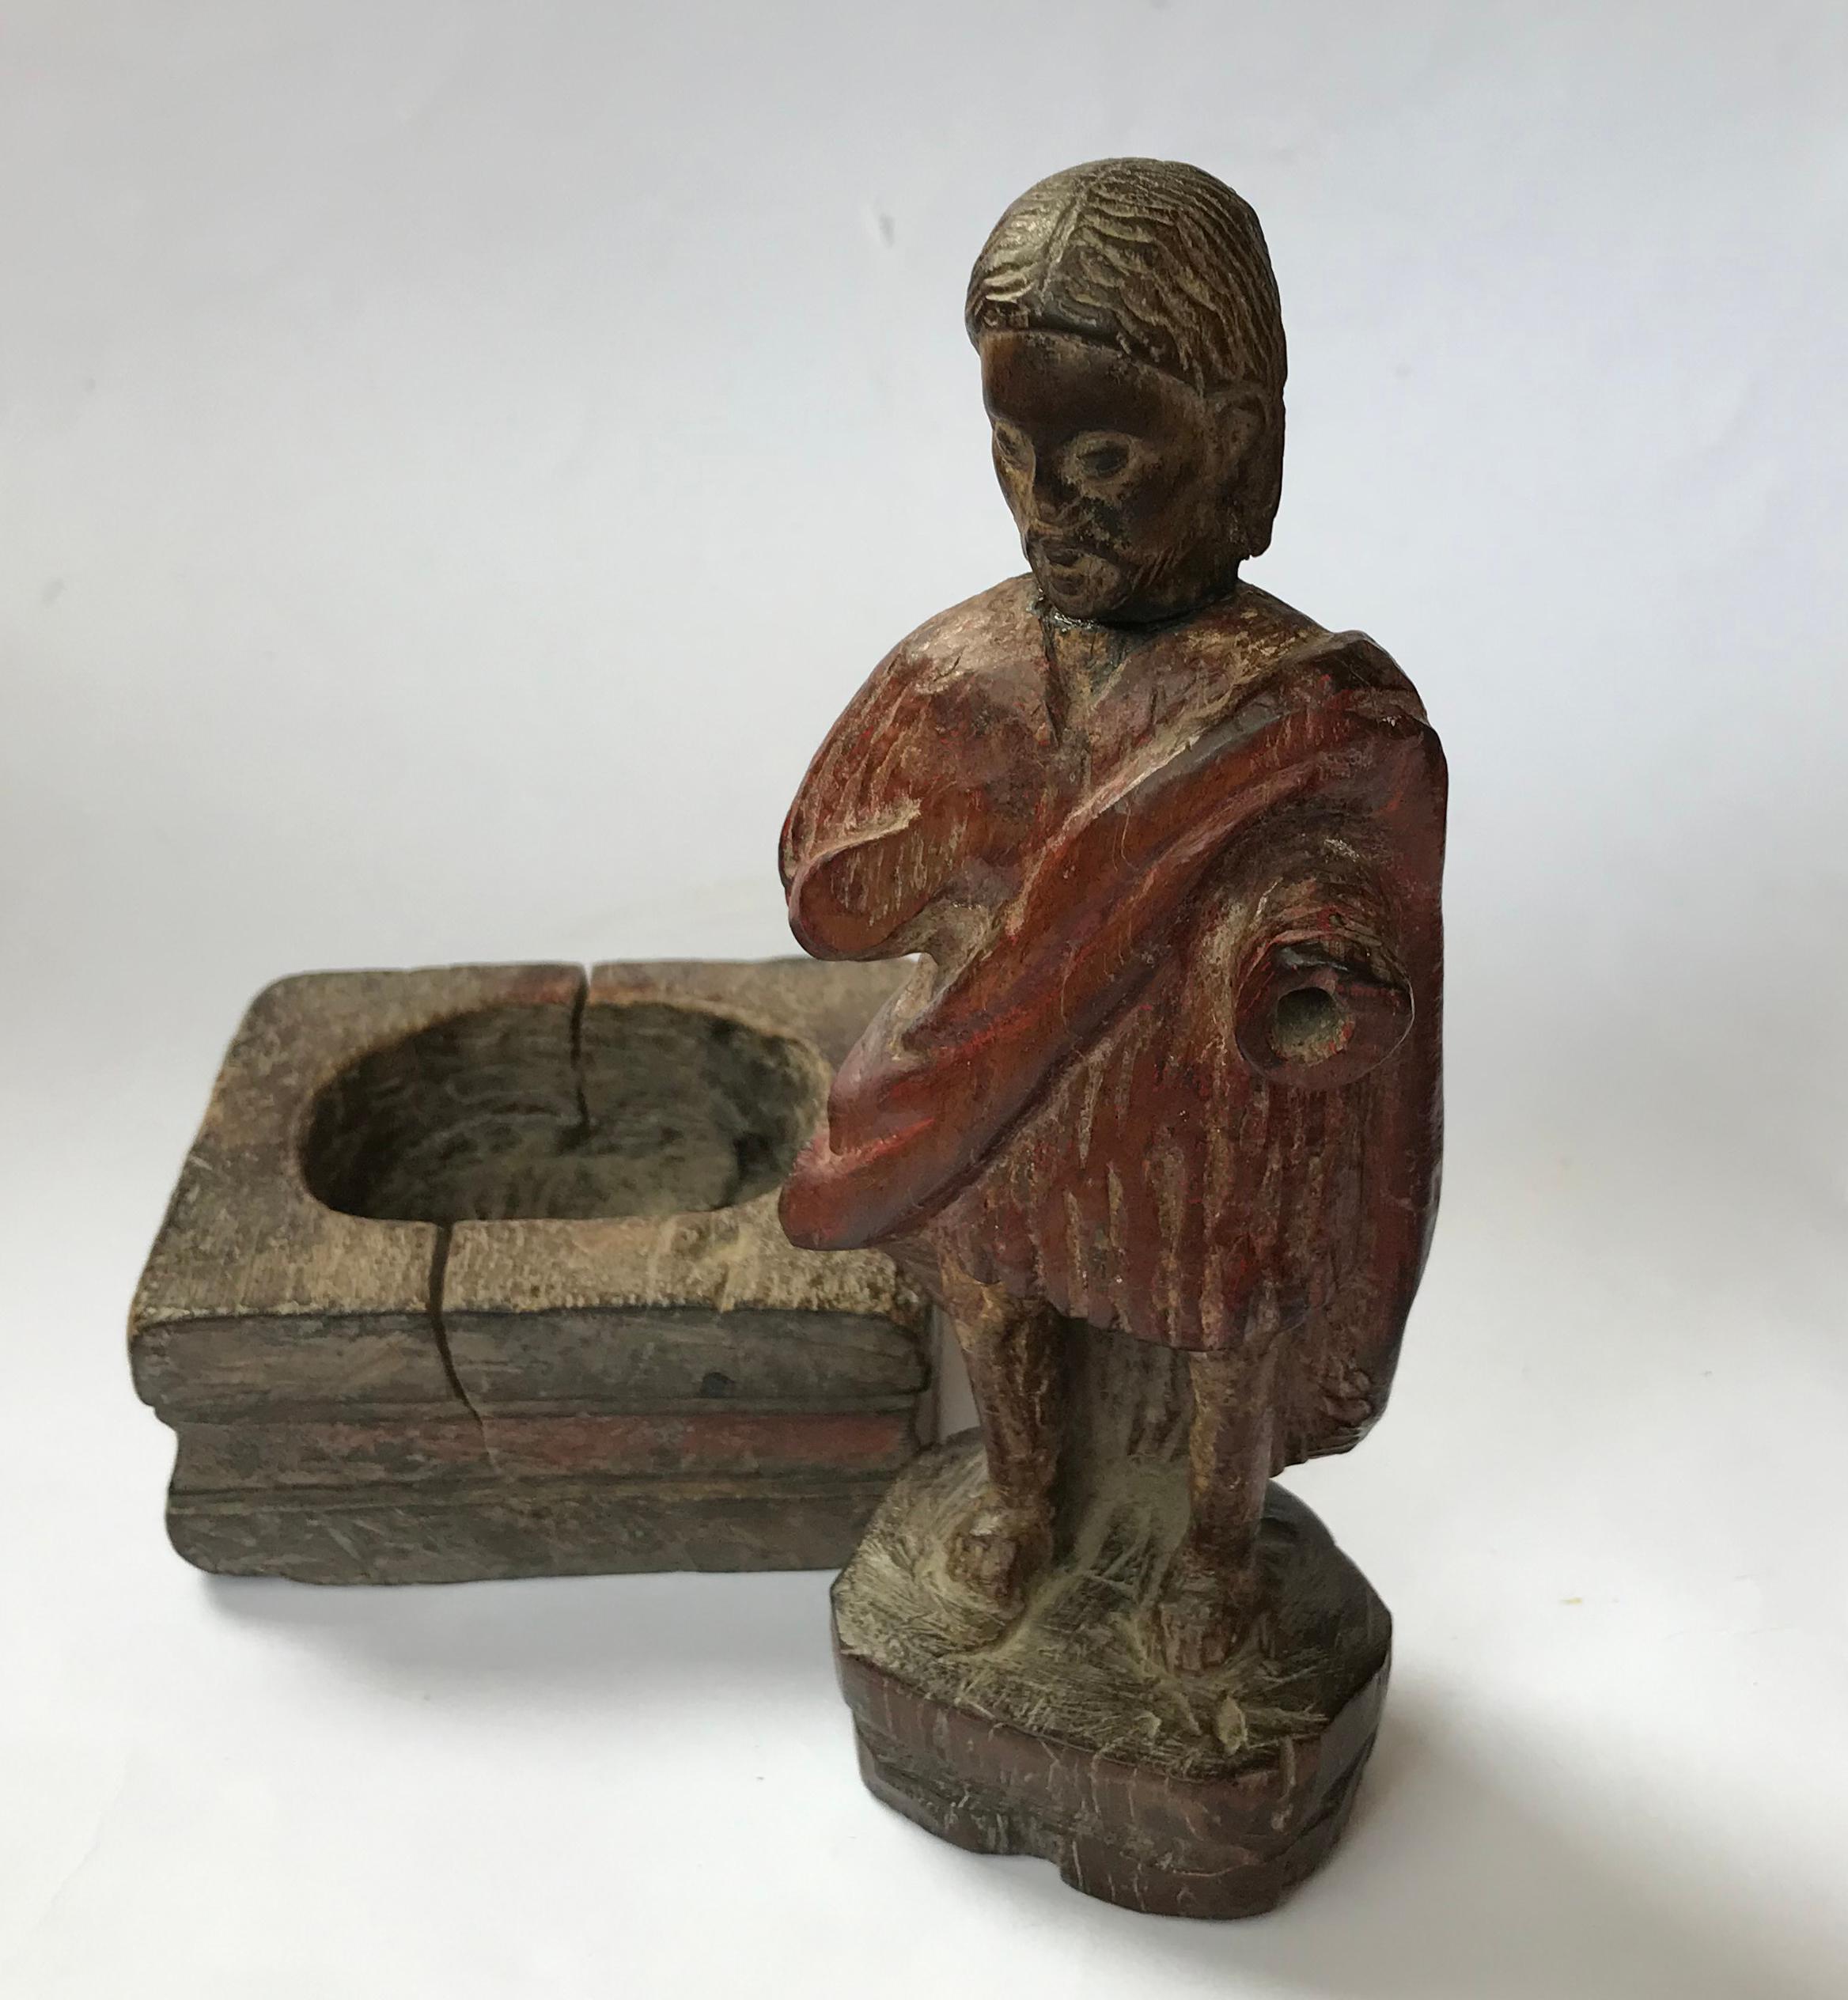 Early Antique English Carved Oak Christian Medieval Circa 15th century

The small carved wood figure of Jesus or a saint carved in oak with poly chrome pigment 

 Condition Minor Losses head reattached 

Measures: height 8 inches width 4